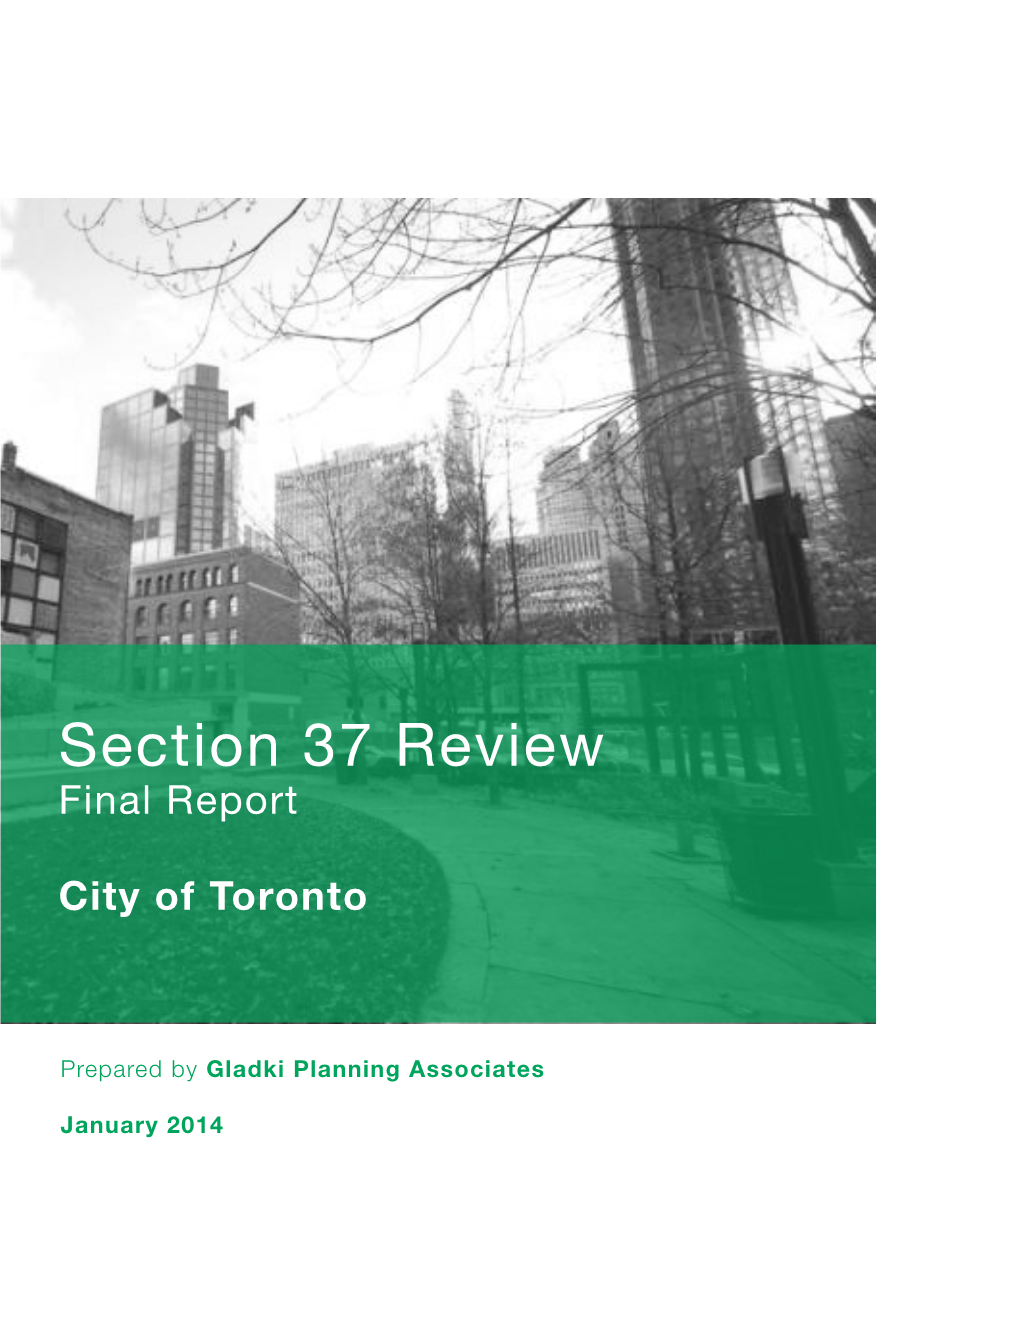 Section 37 Review Final Report